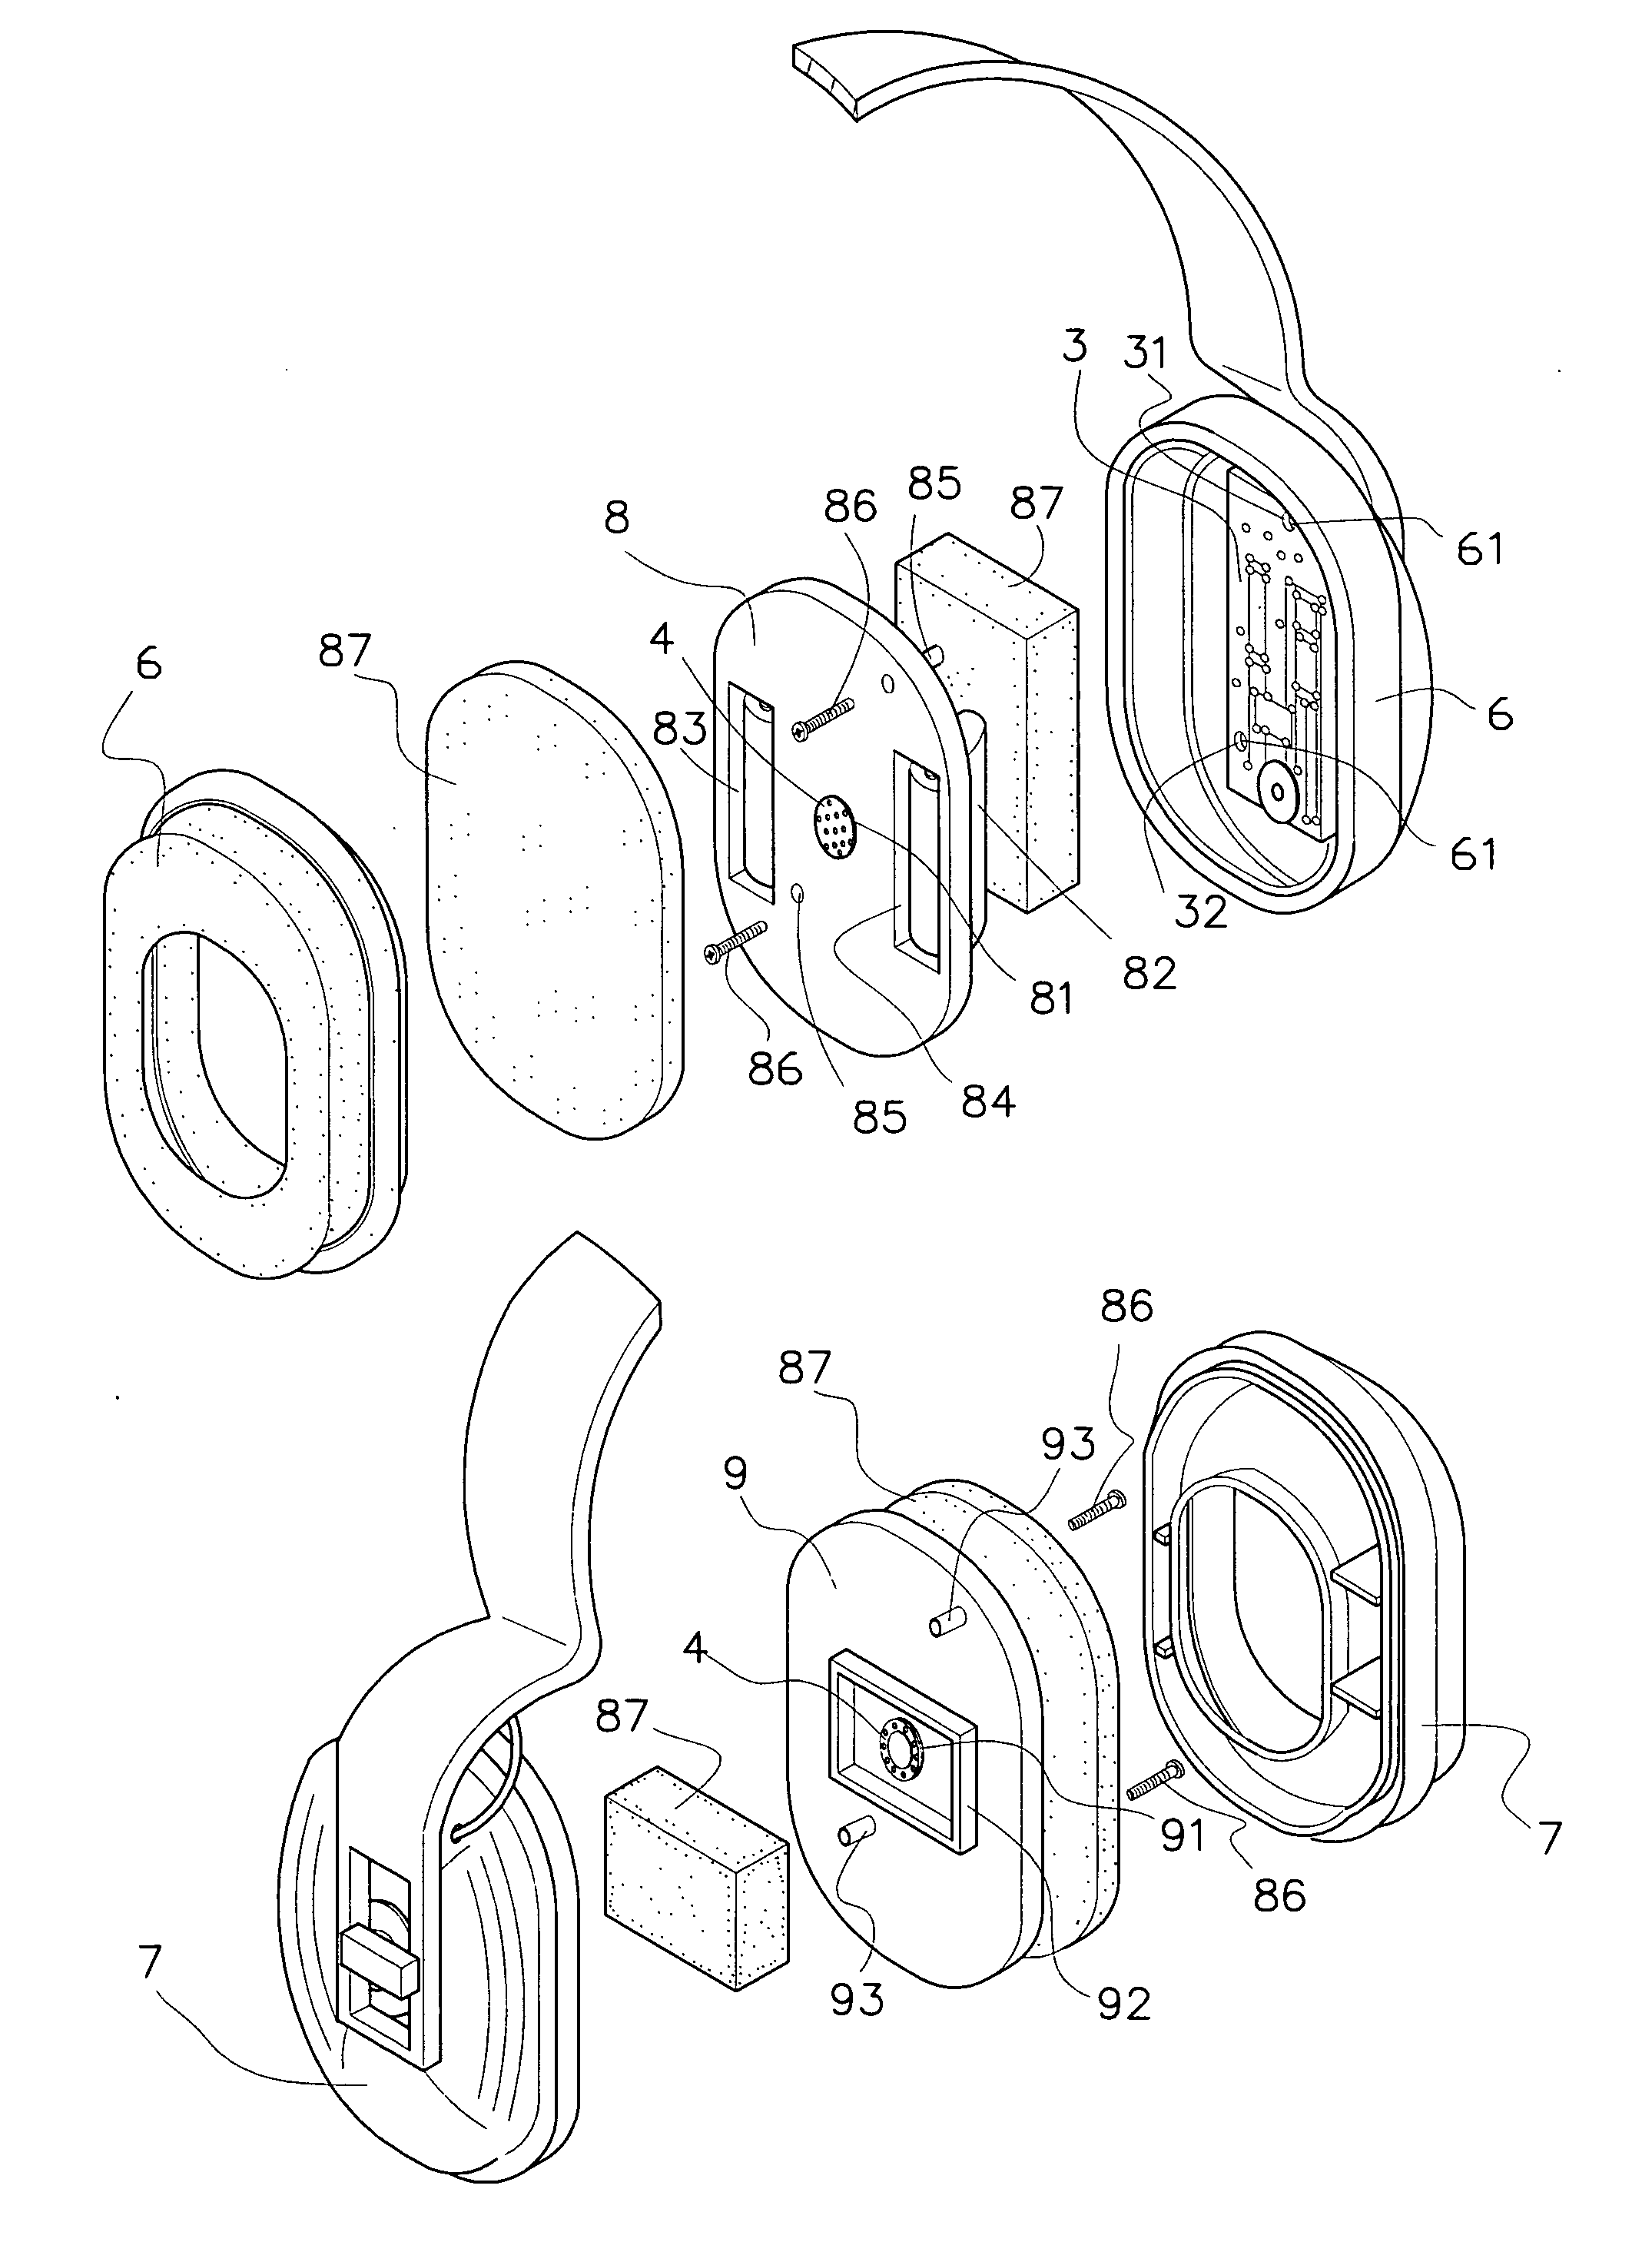 Earmuff structure for headset or ear protector